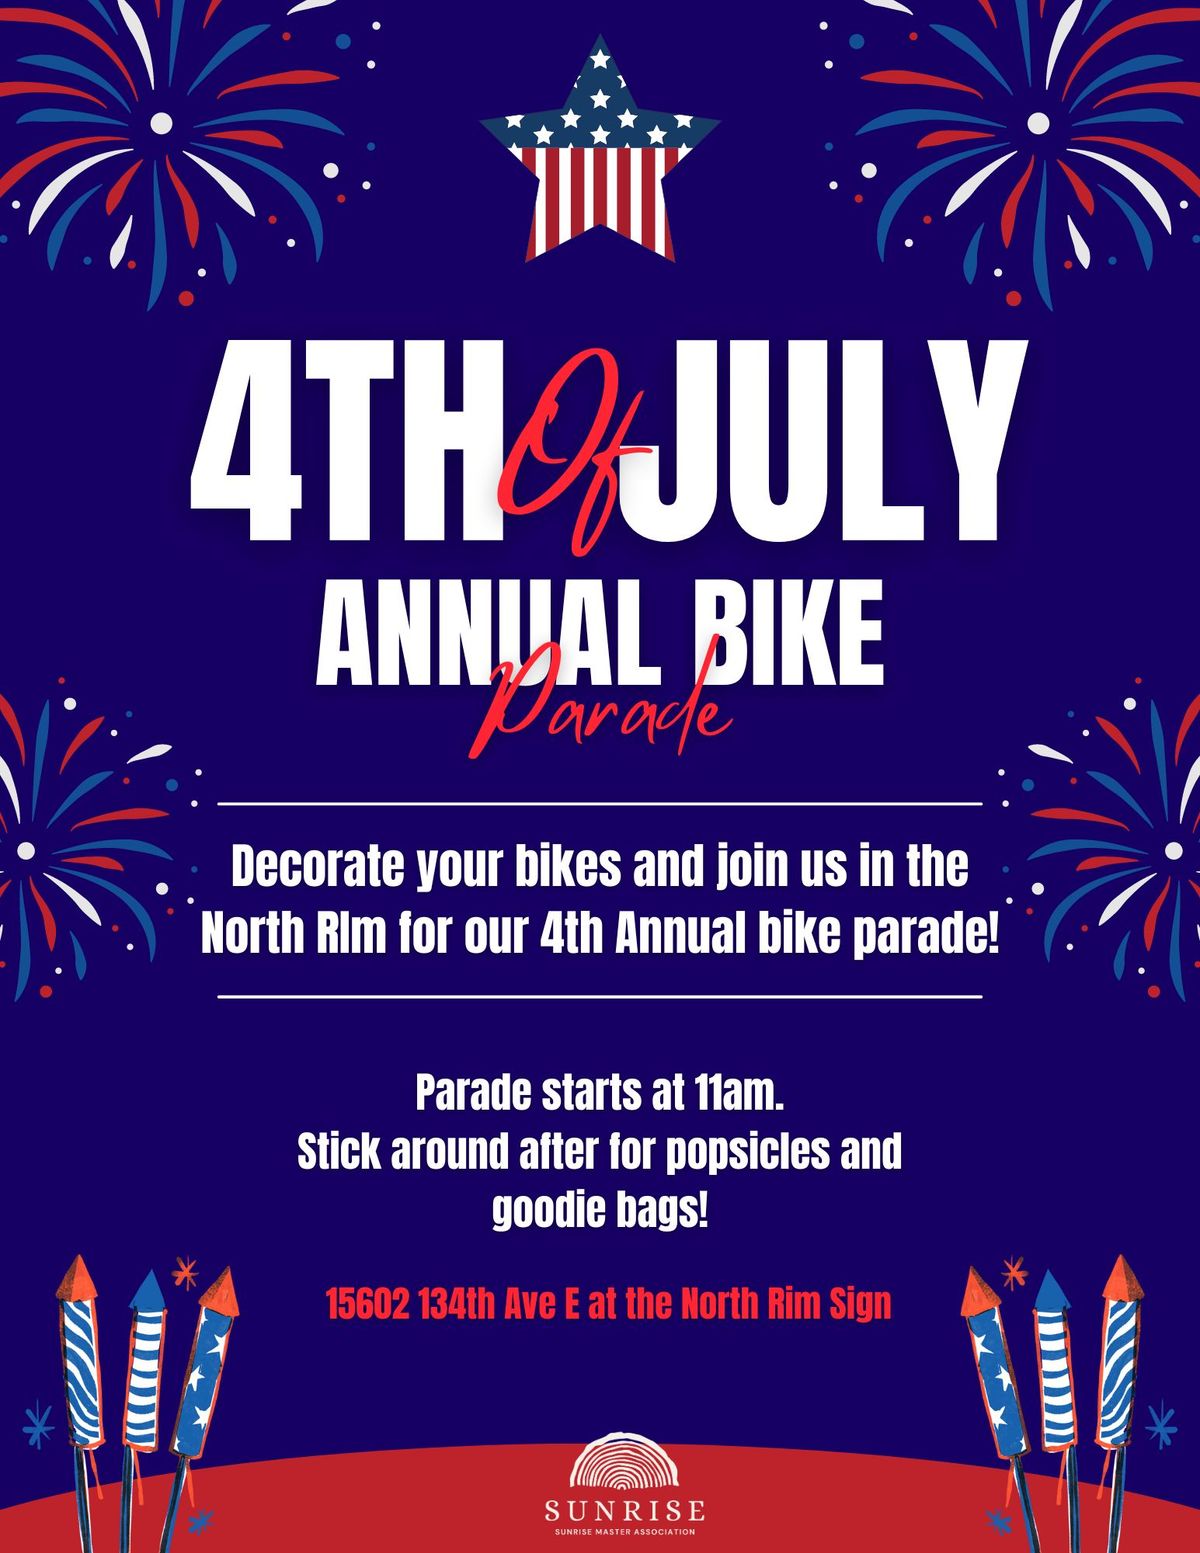 4th of July Annual Bike Parade